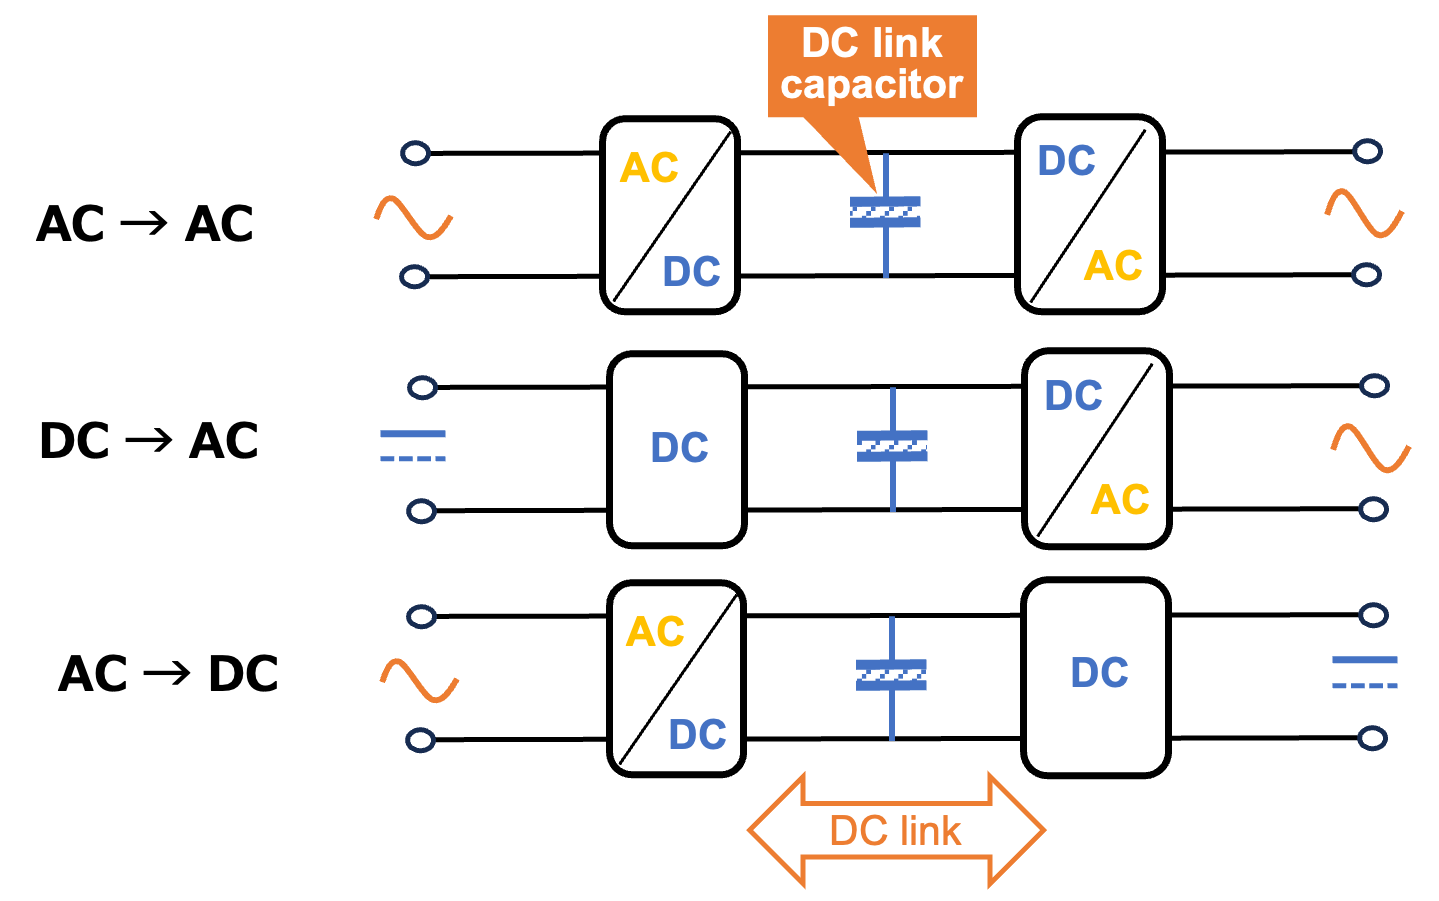 Fig. 6 DC link capacitor on various power conversion